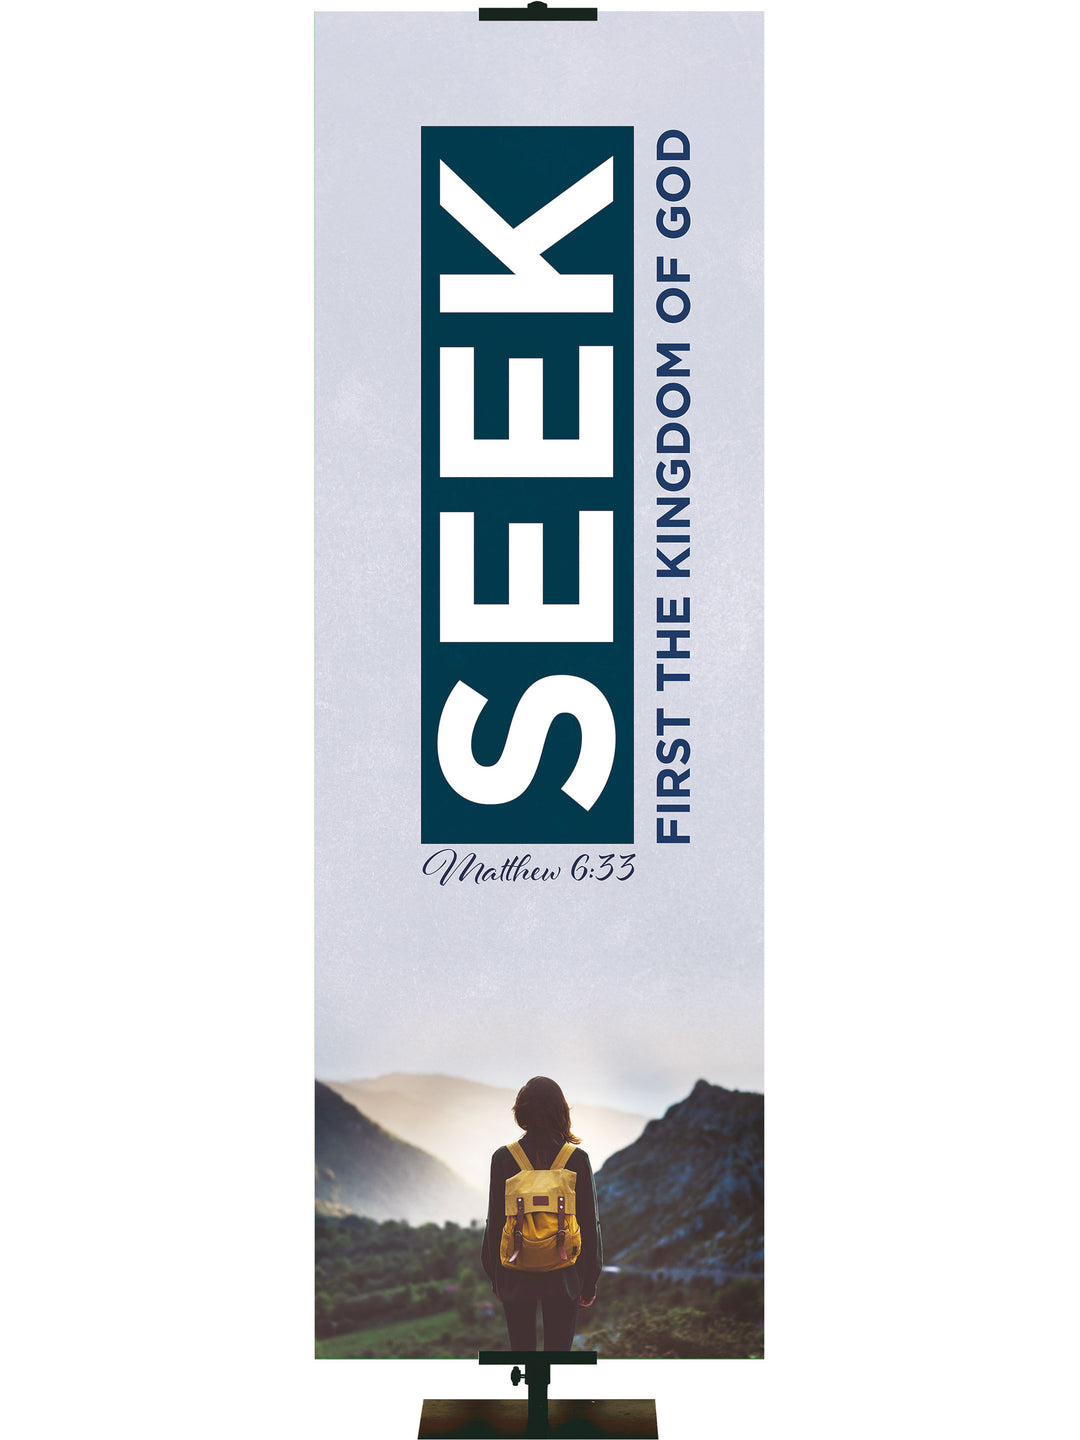 Seek First The Kingdom Of God. Matthew 6:33 Church Banner with backpacker and misty canyon